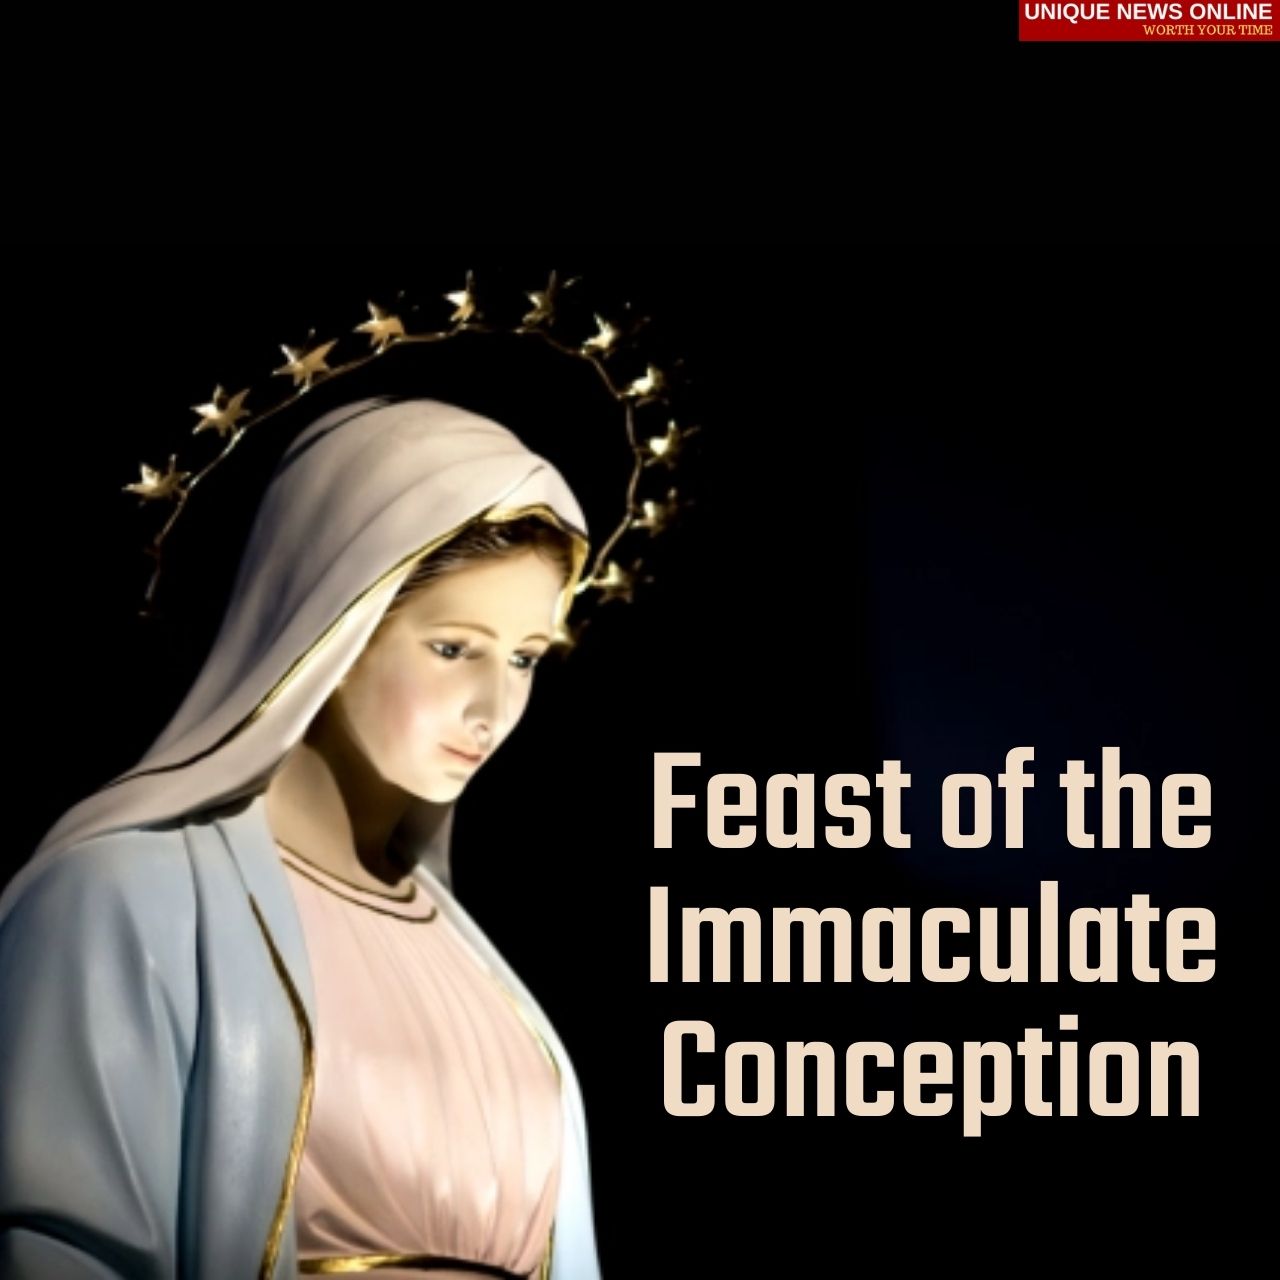 Feast of the Immaculate Conception 2021 Quotes, Wishes, Greetings, Sayings, HD Images to Share